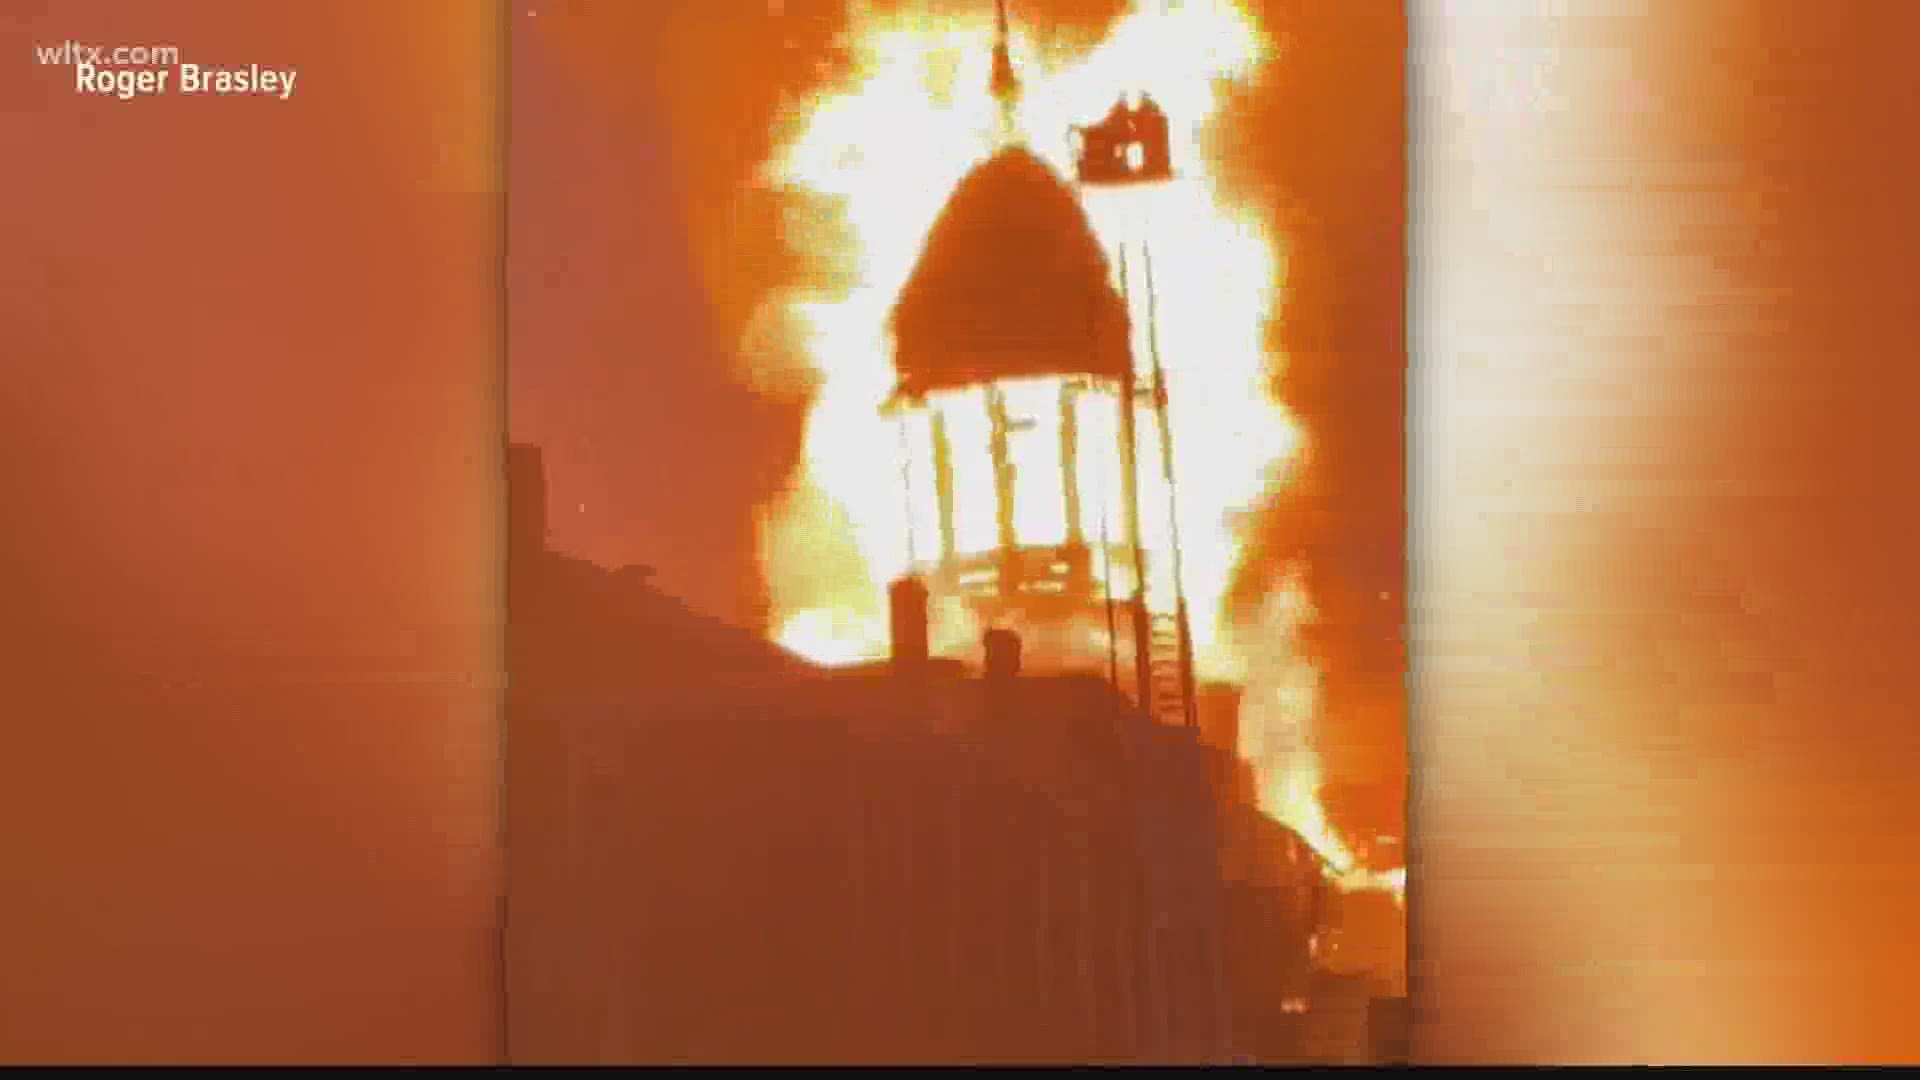 "The Babcock fire attacked the hopes and dreams of all of Columbia and the Midlands to preserve an important part of history," says the owner of the building.